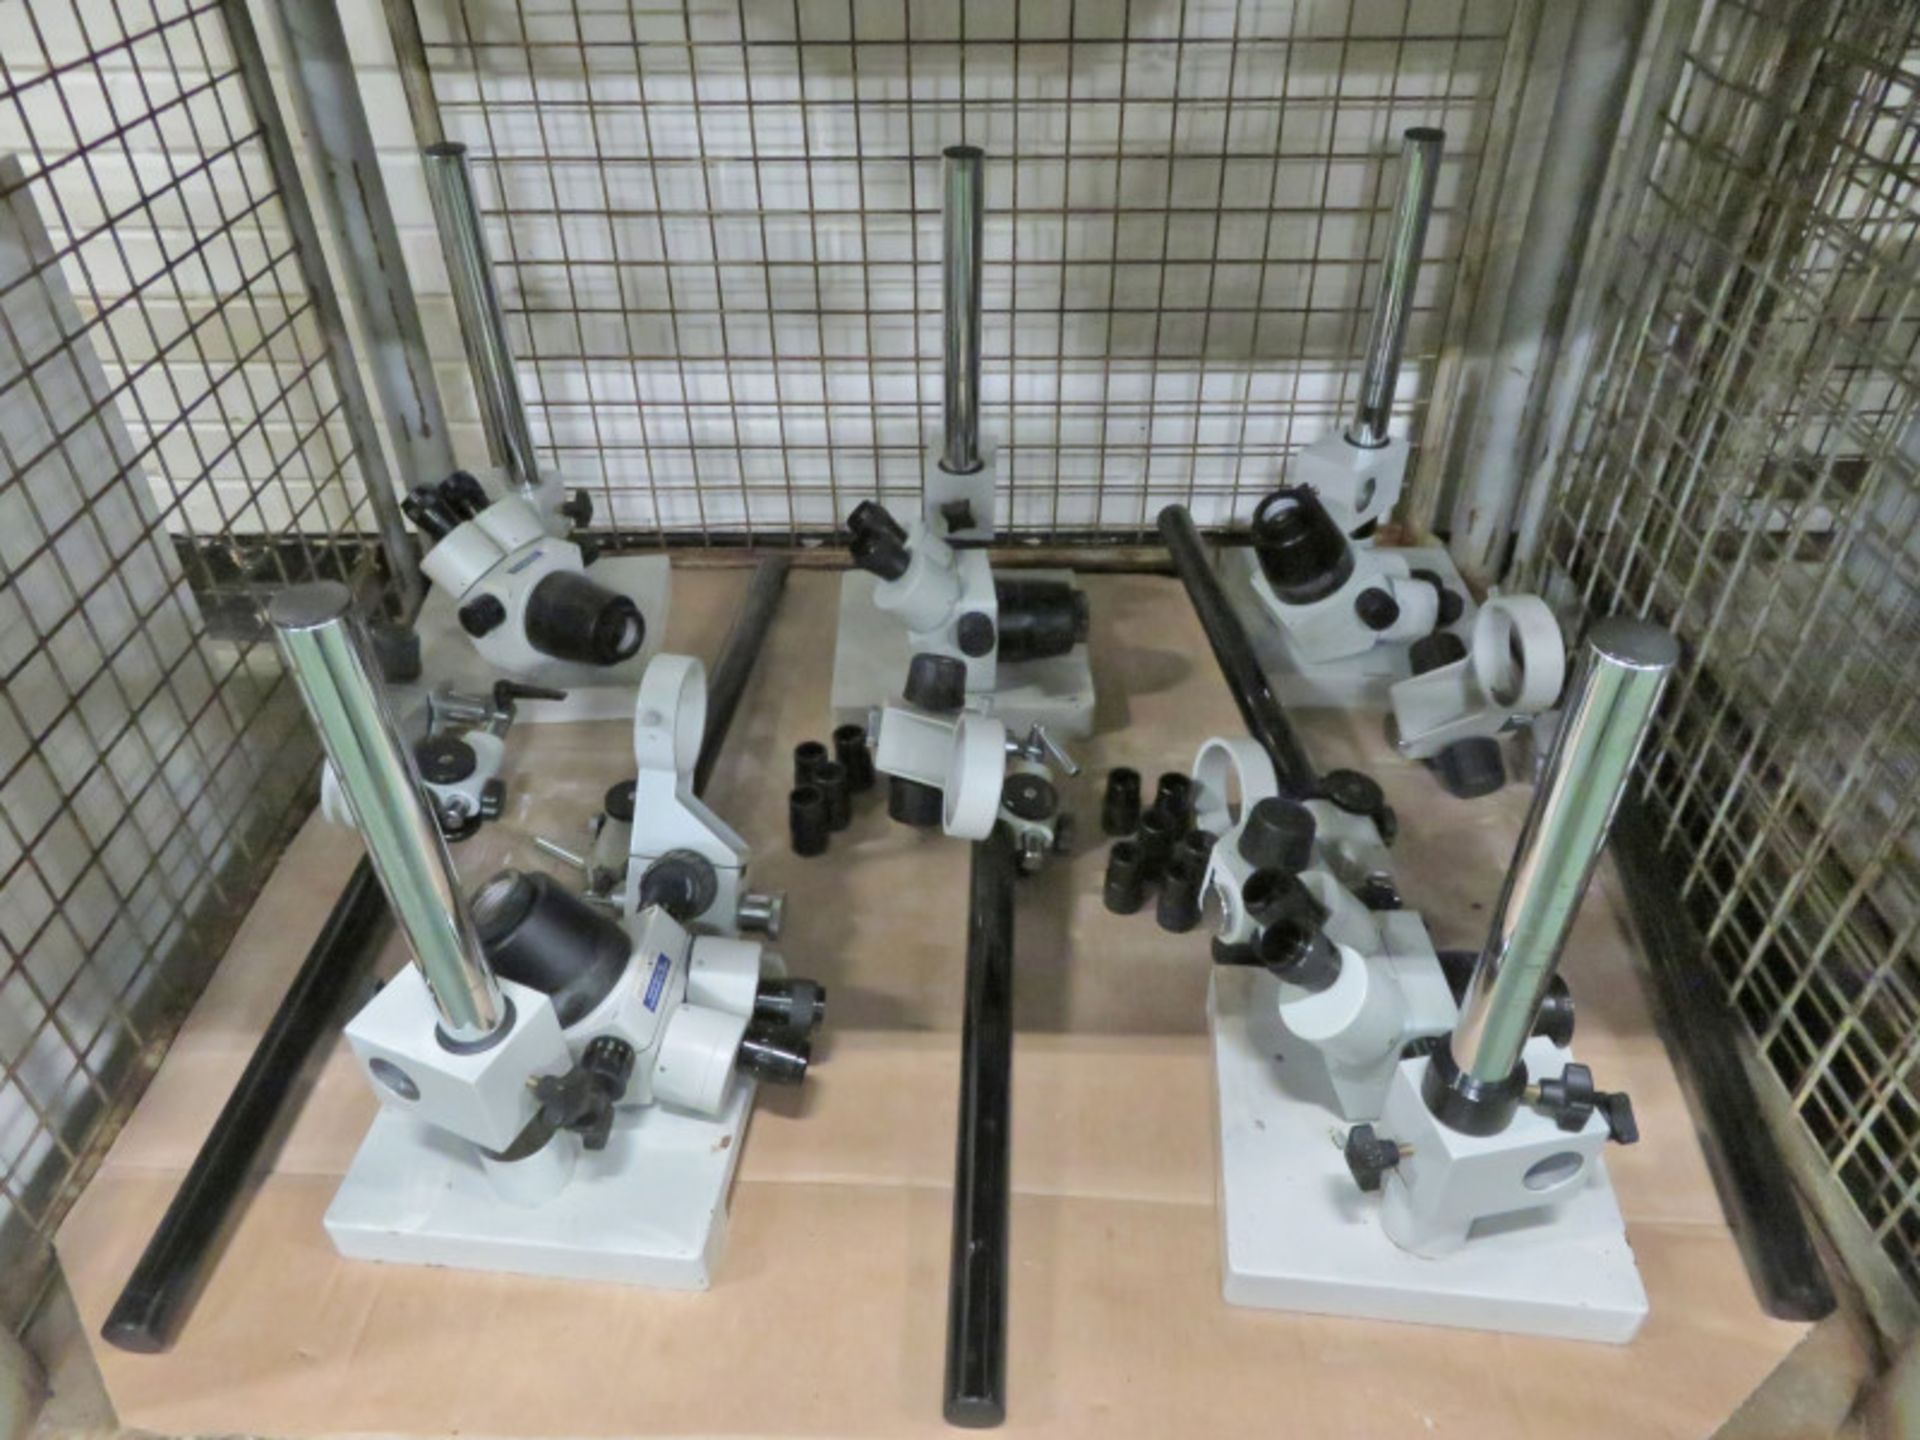 5x Microscopes with eyepieces & stands